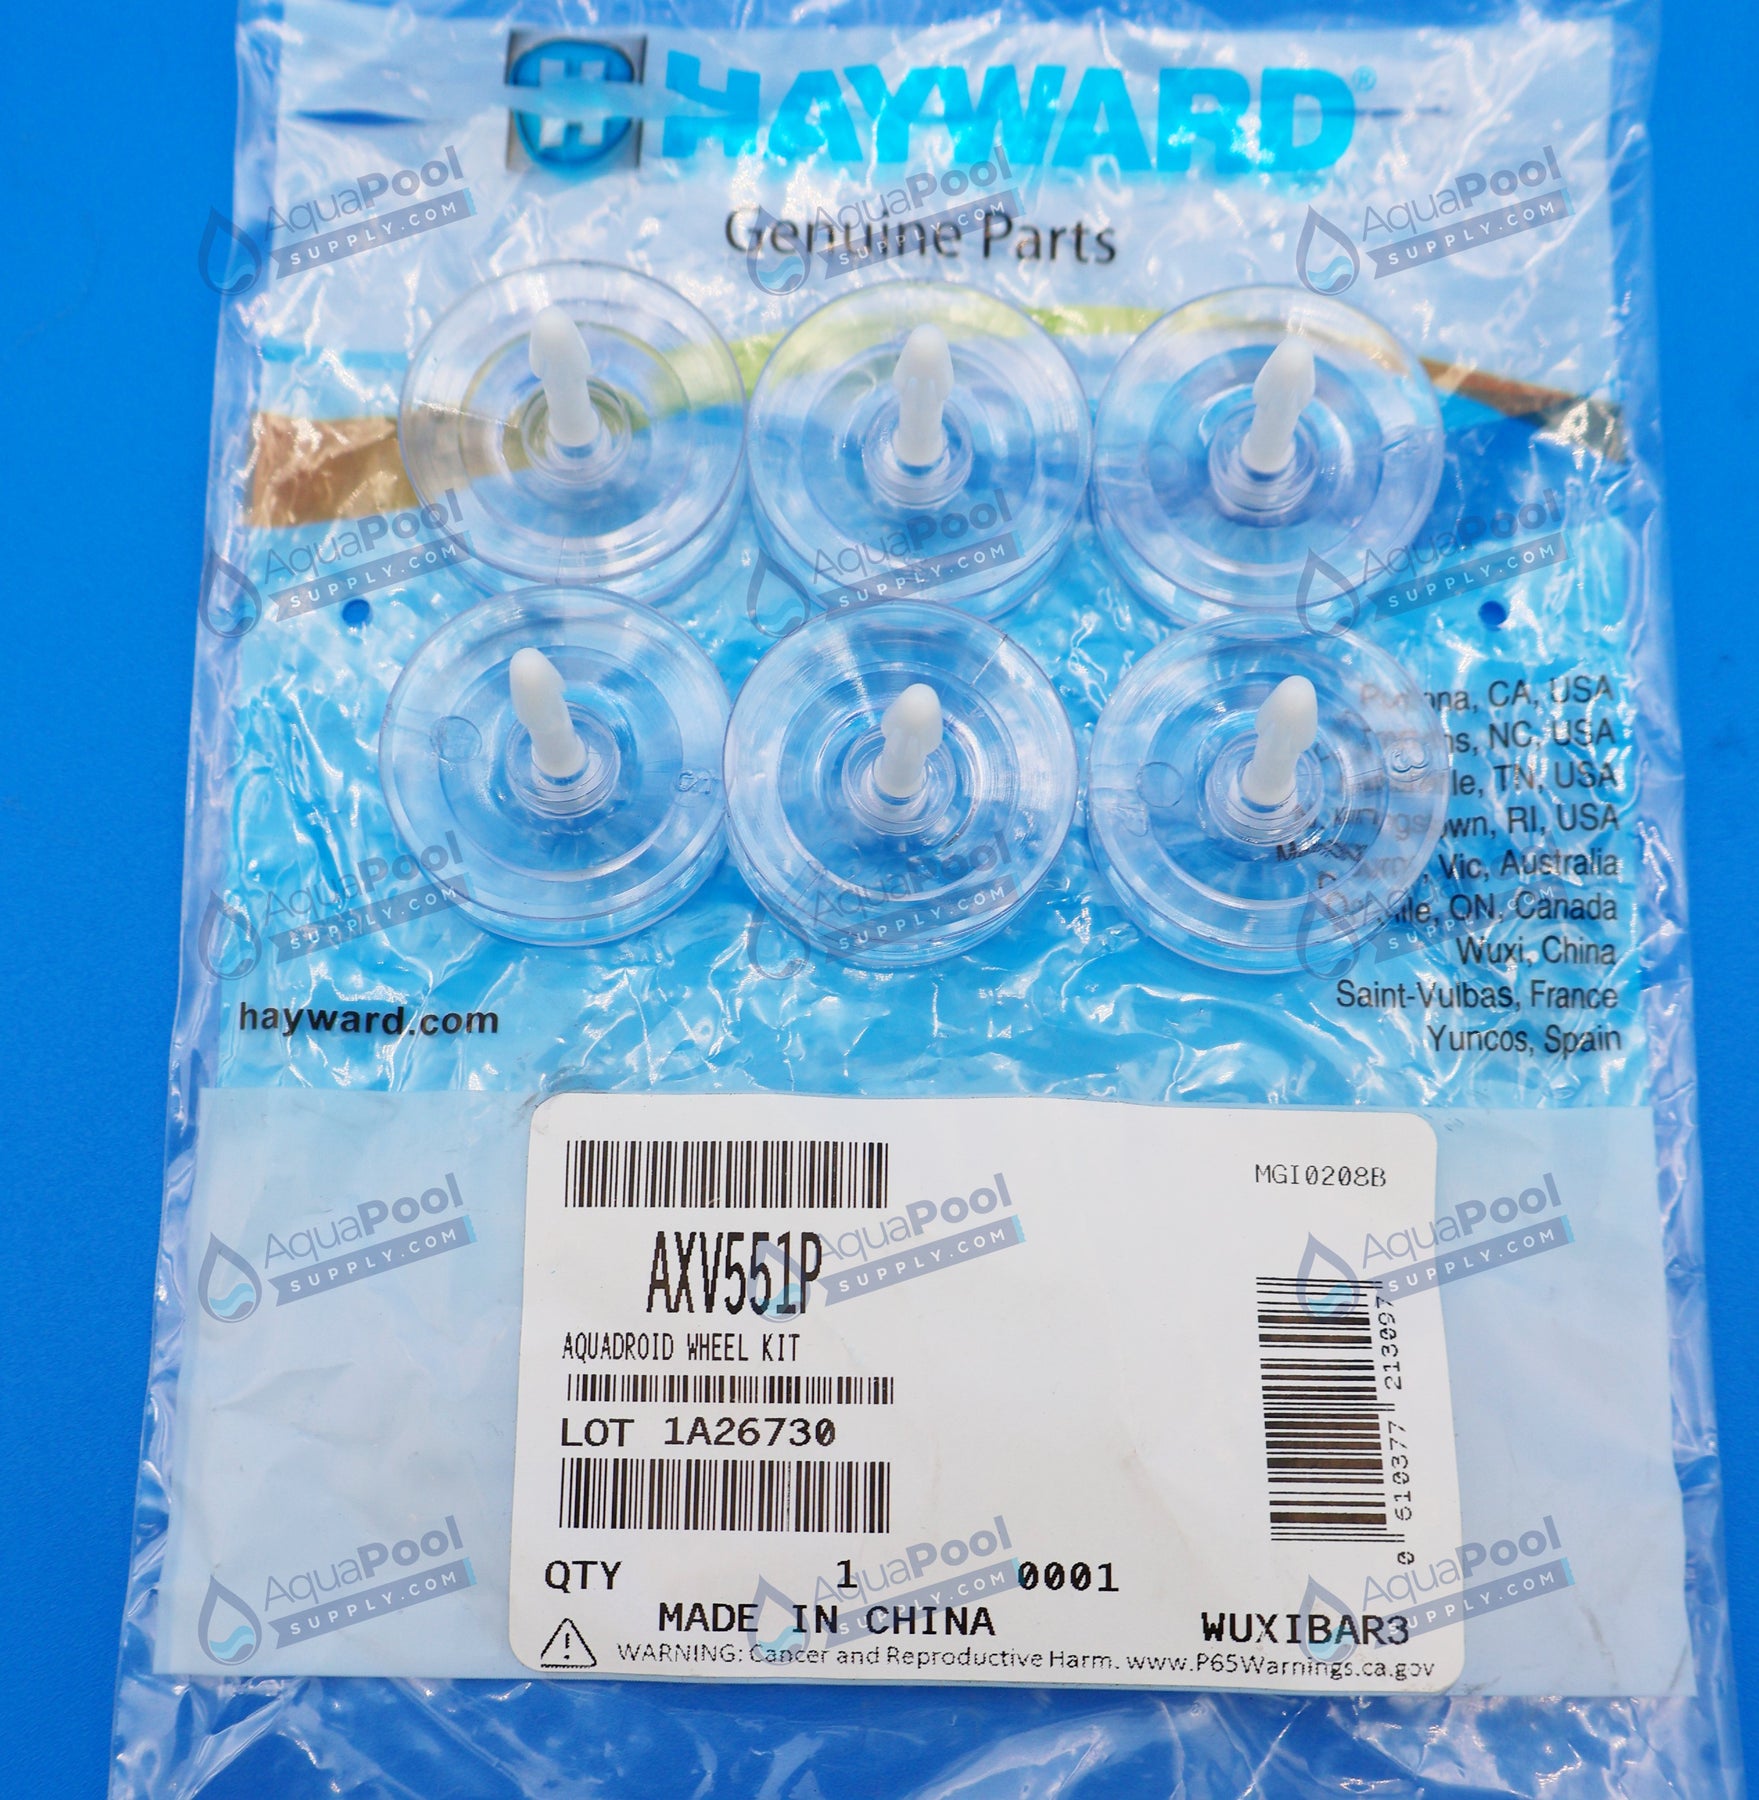 Hayward Wheel Kit for AquaBug, Penguin, Wanda the Whale, Diver Dave - Includes 6 Wheels and Axles AXV551P - img-3